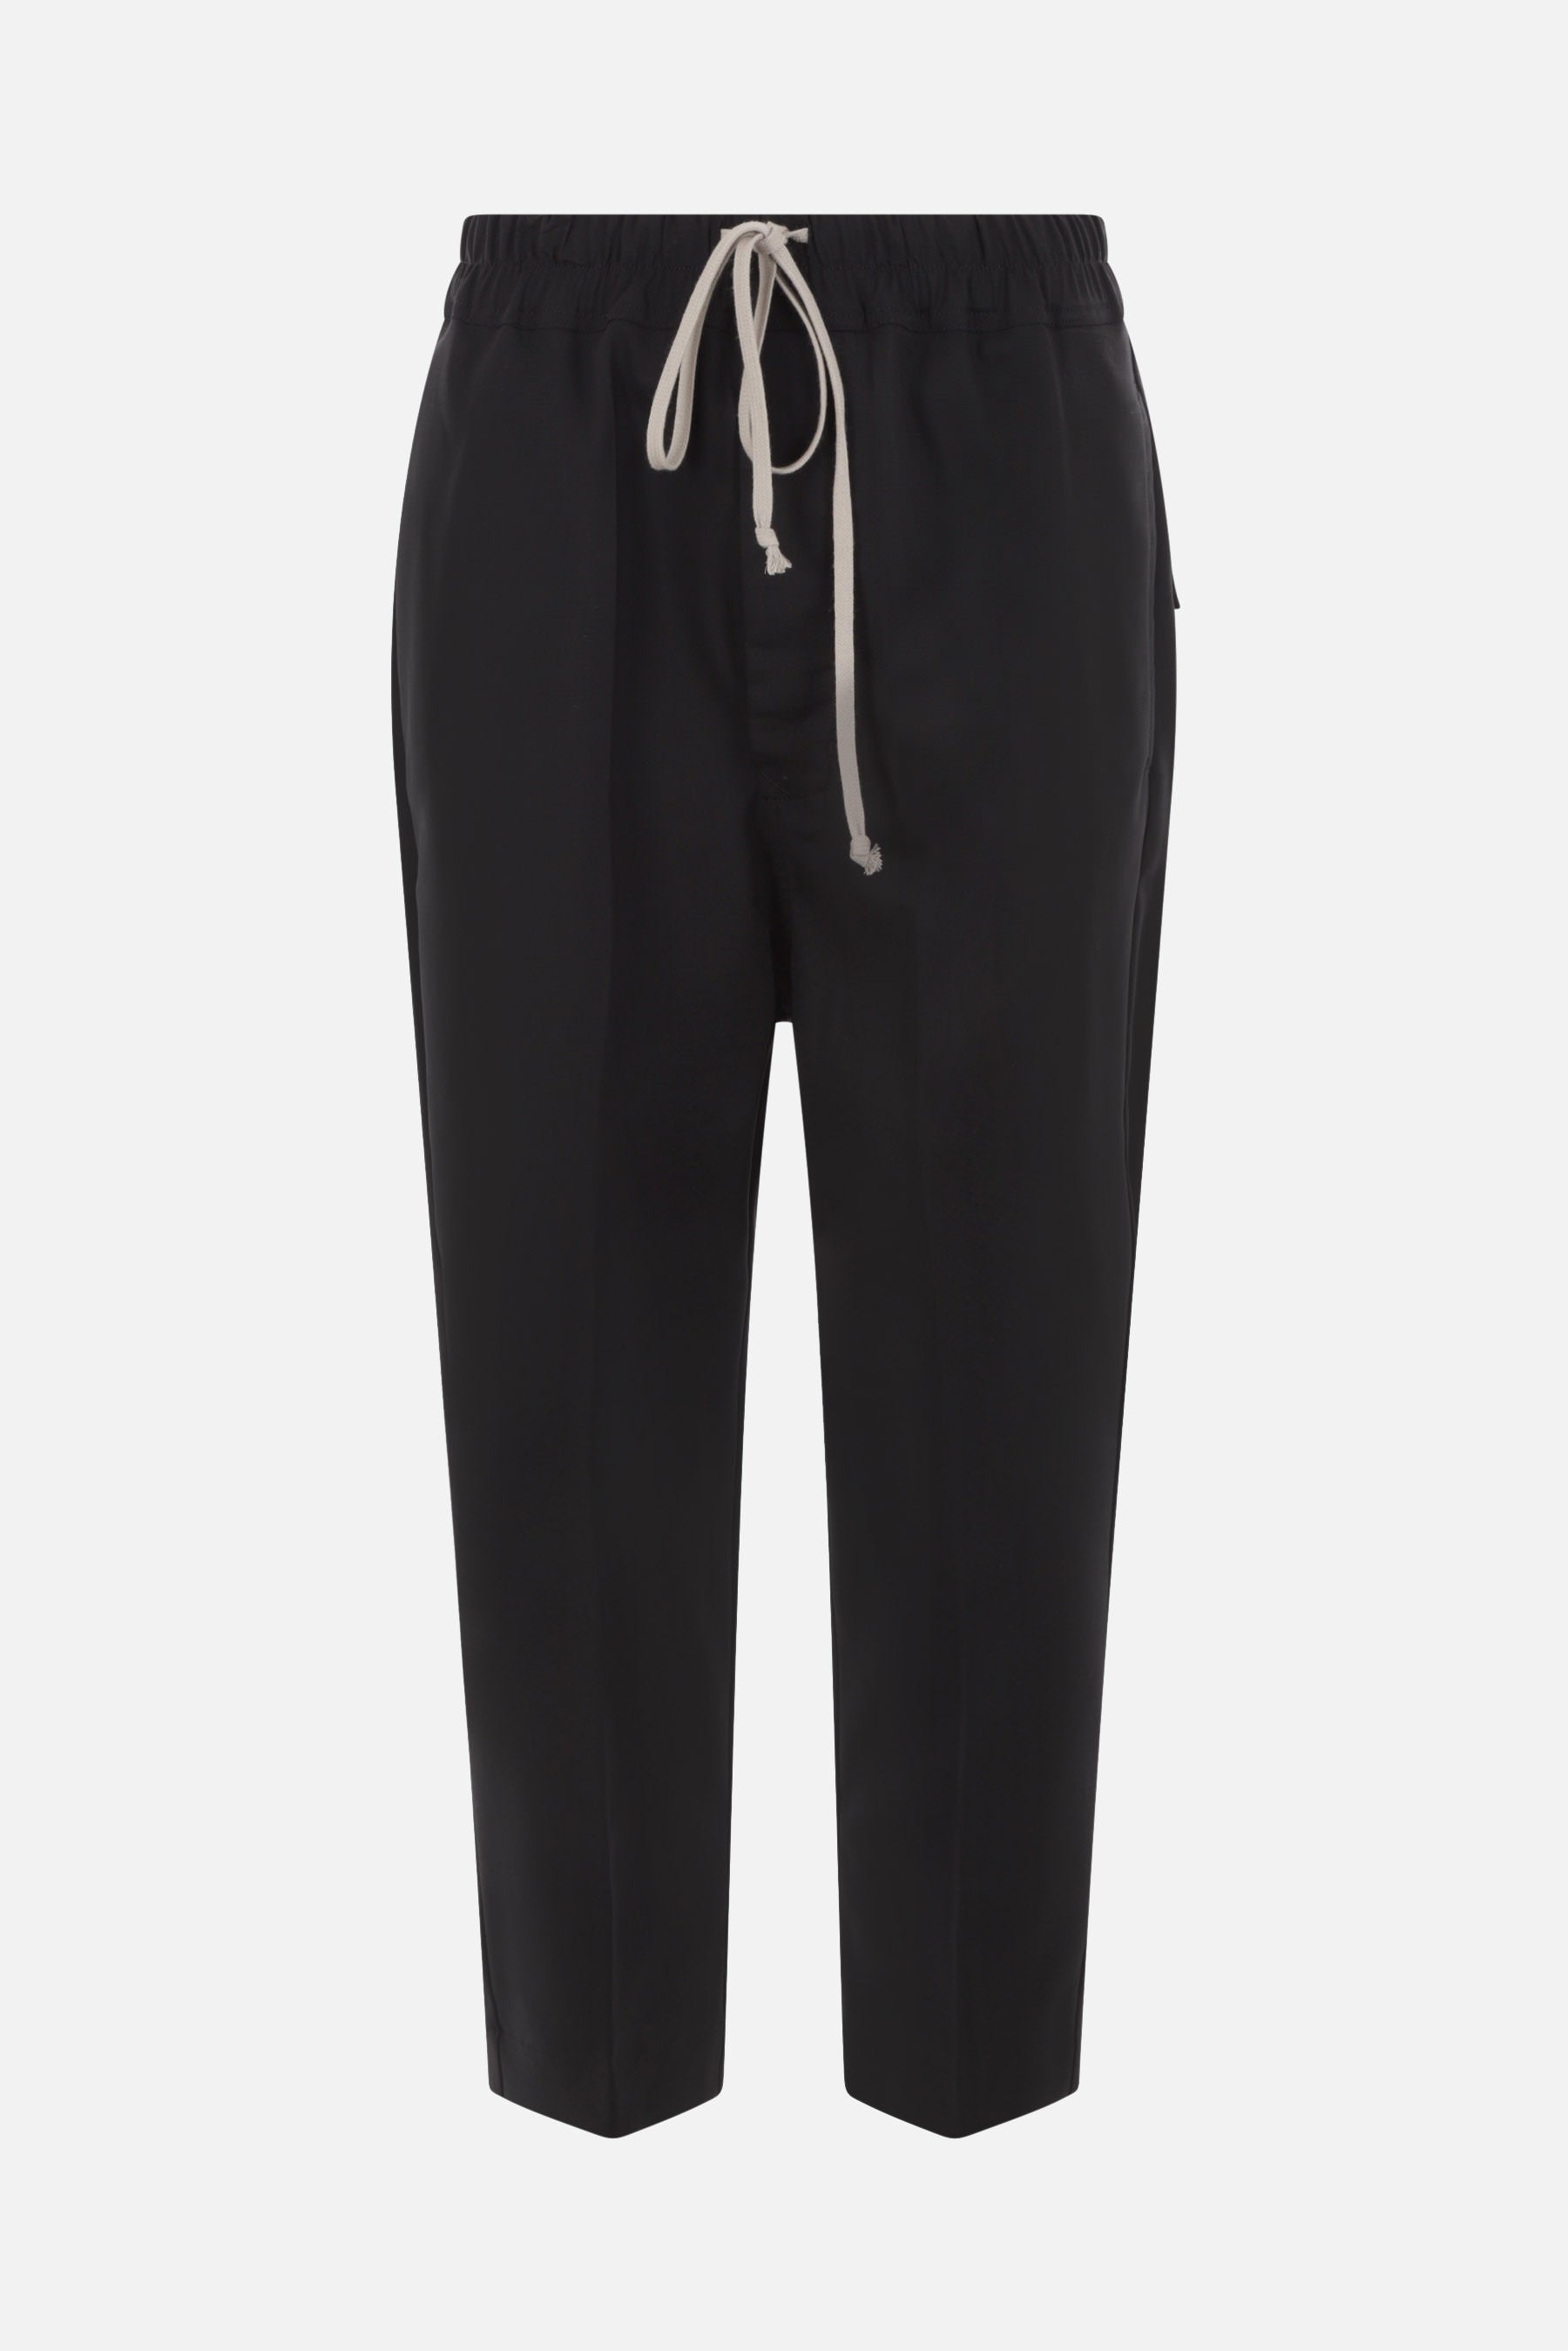 Astaires stretch wool cropped pants